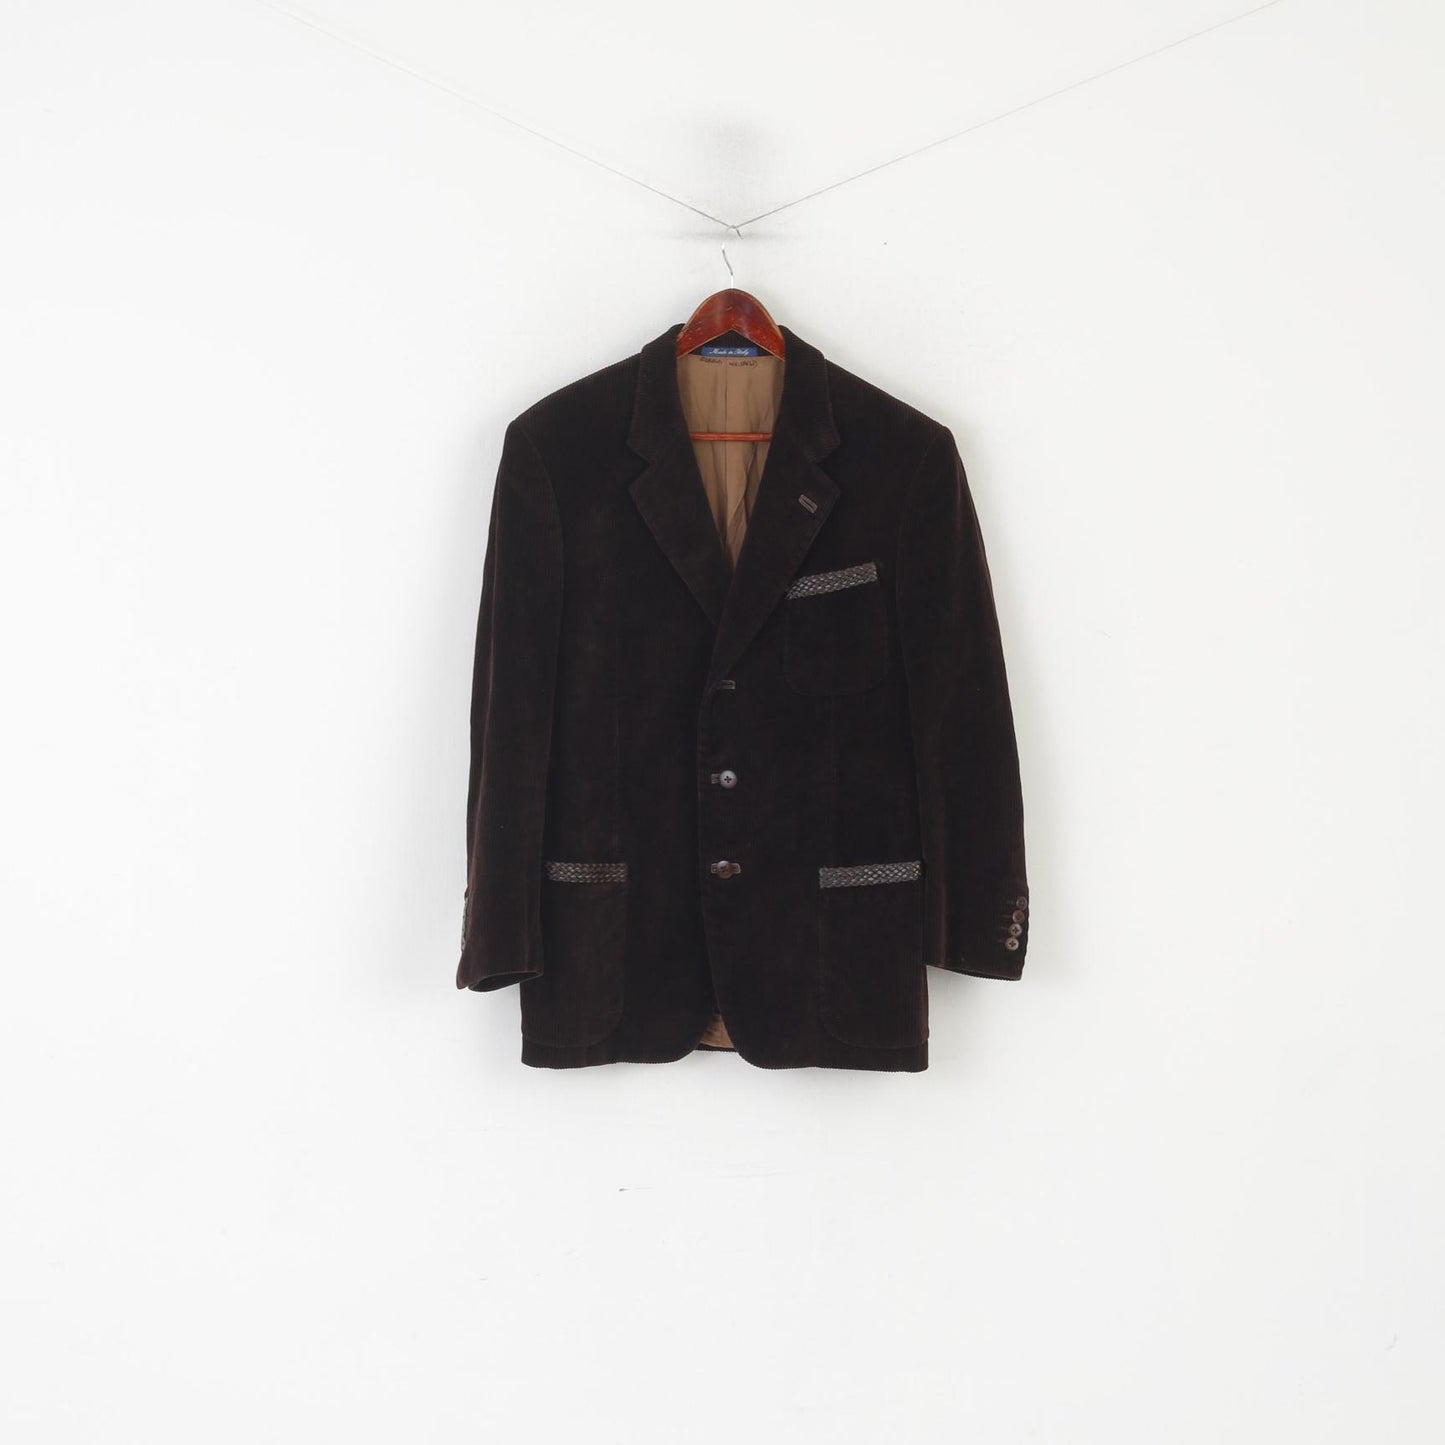 Wana Men 50 40 Blazer Brown Vintage Cotton Corduroy Made in Italy Single Breasted Jacket